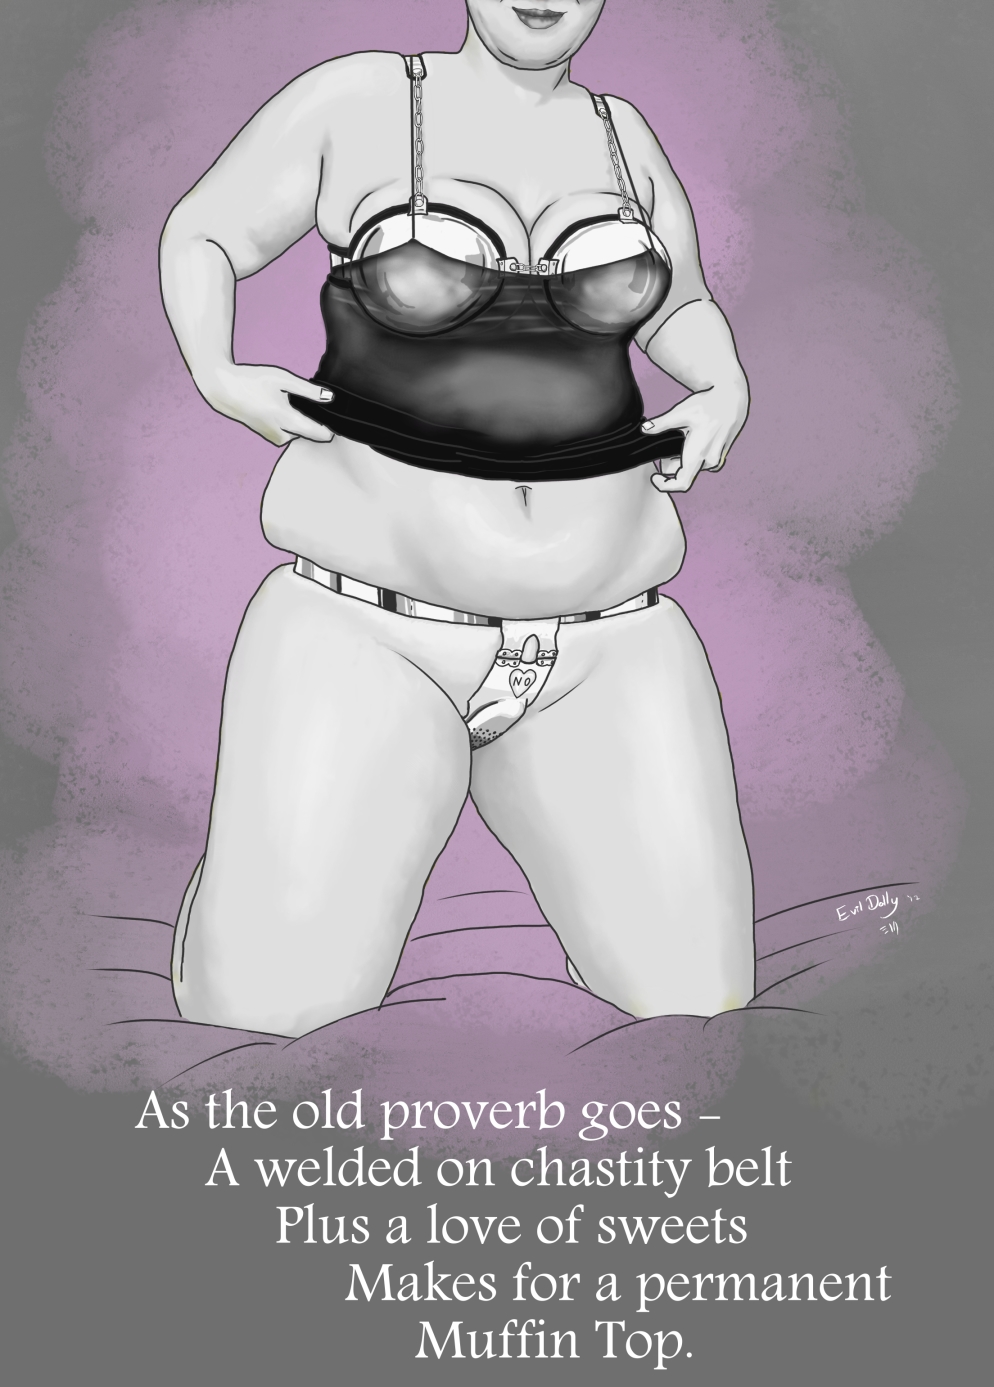 Chin-down drawing of a plump woman in far-to-snug metal chastity bra and chastity belt. Beneath are the words "As the old proverb goes - A welded on chastity belt plus a love of sweets makes for a permanent muffintop."  2012.